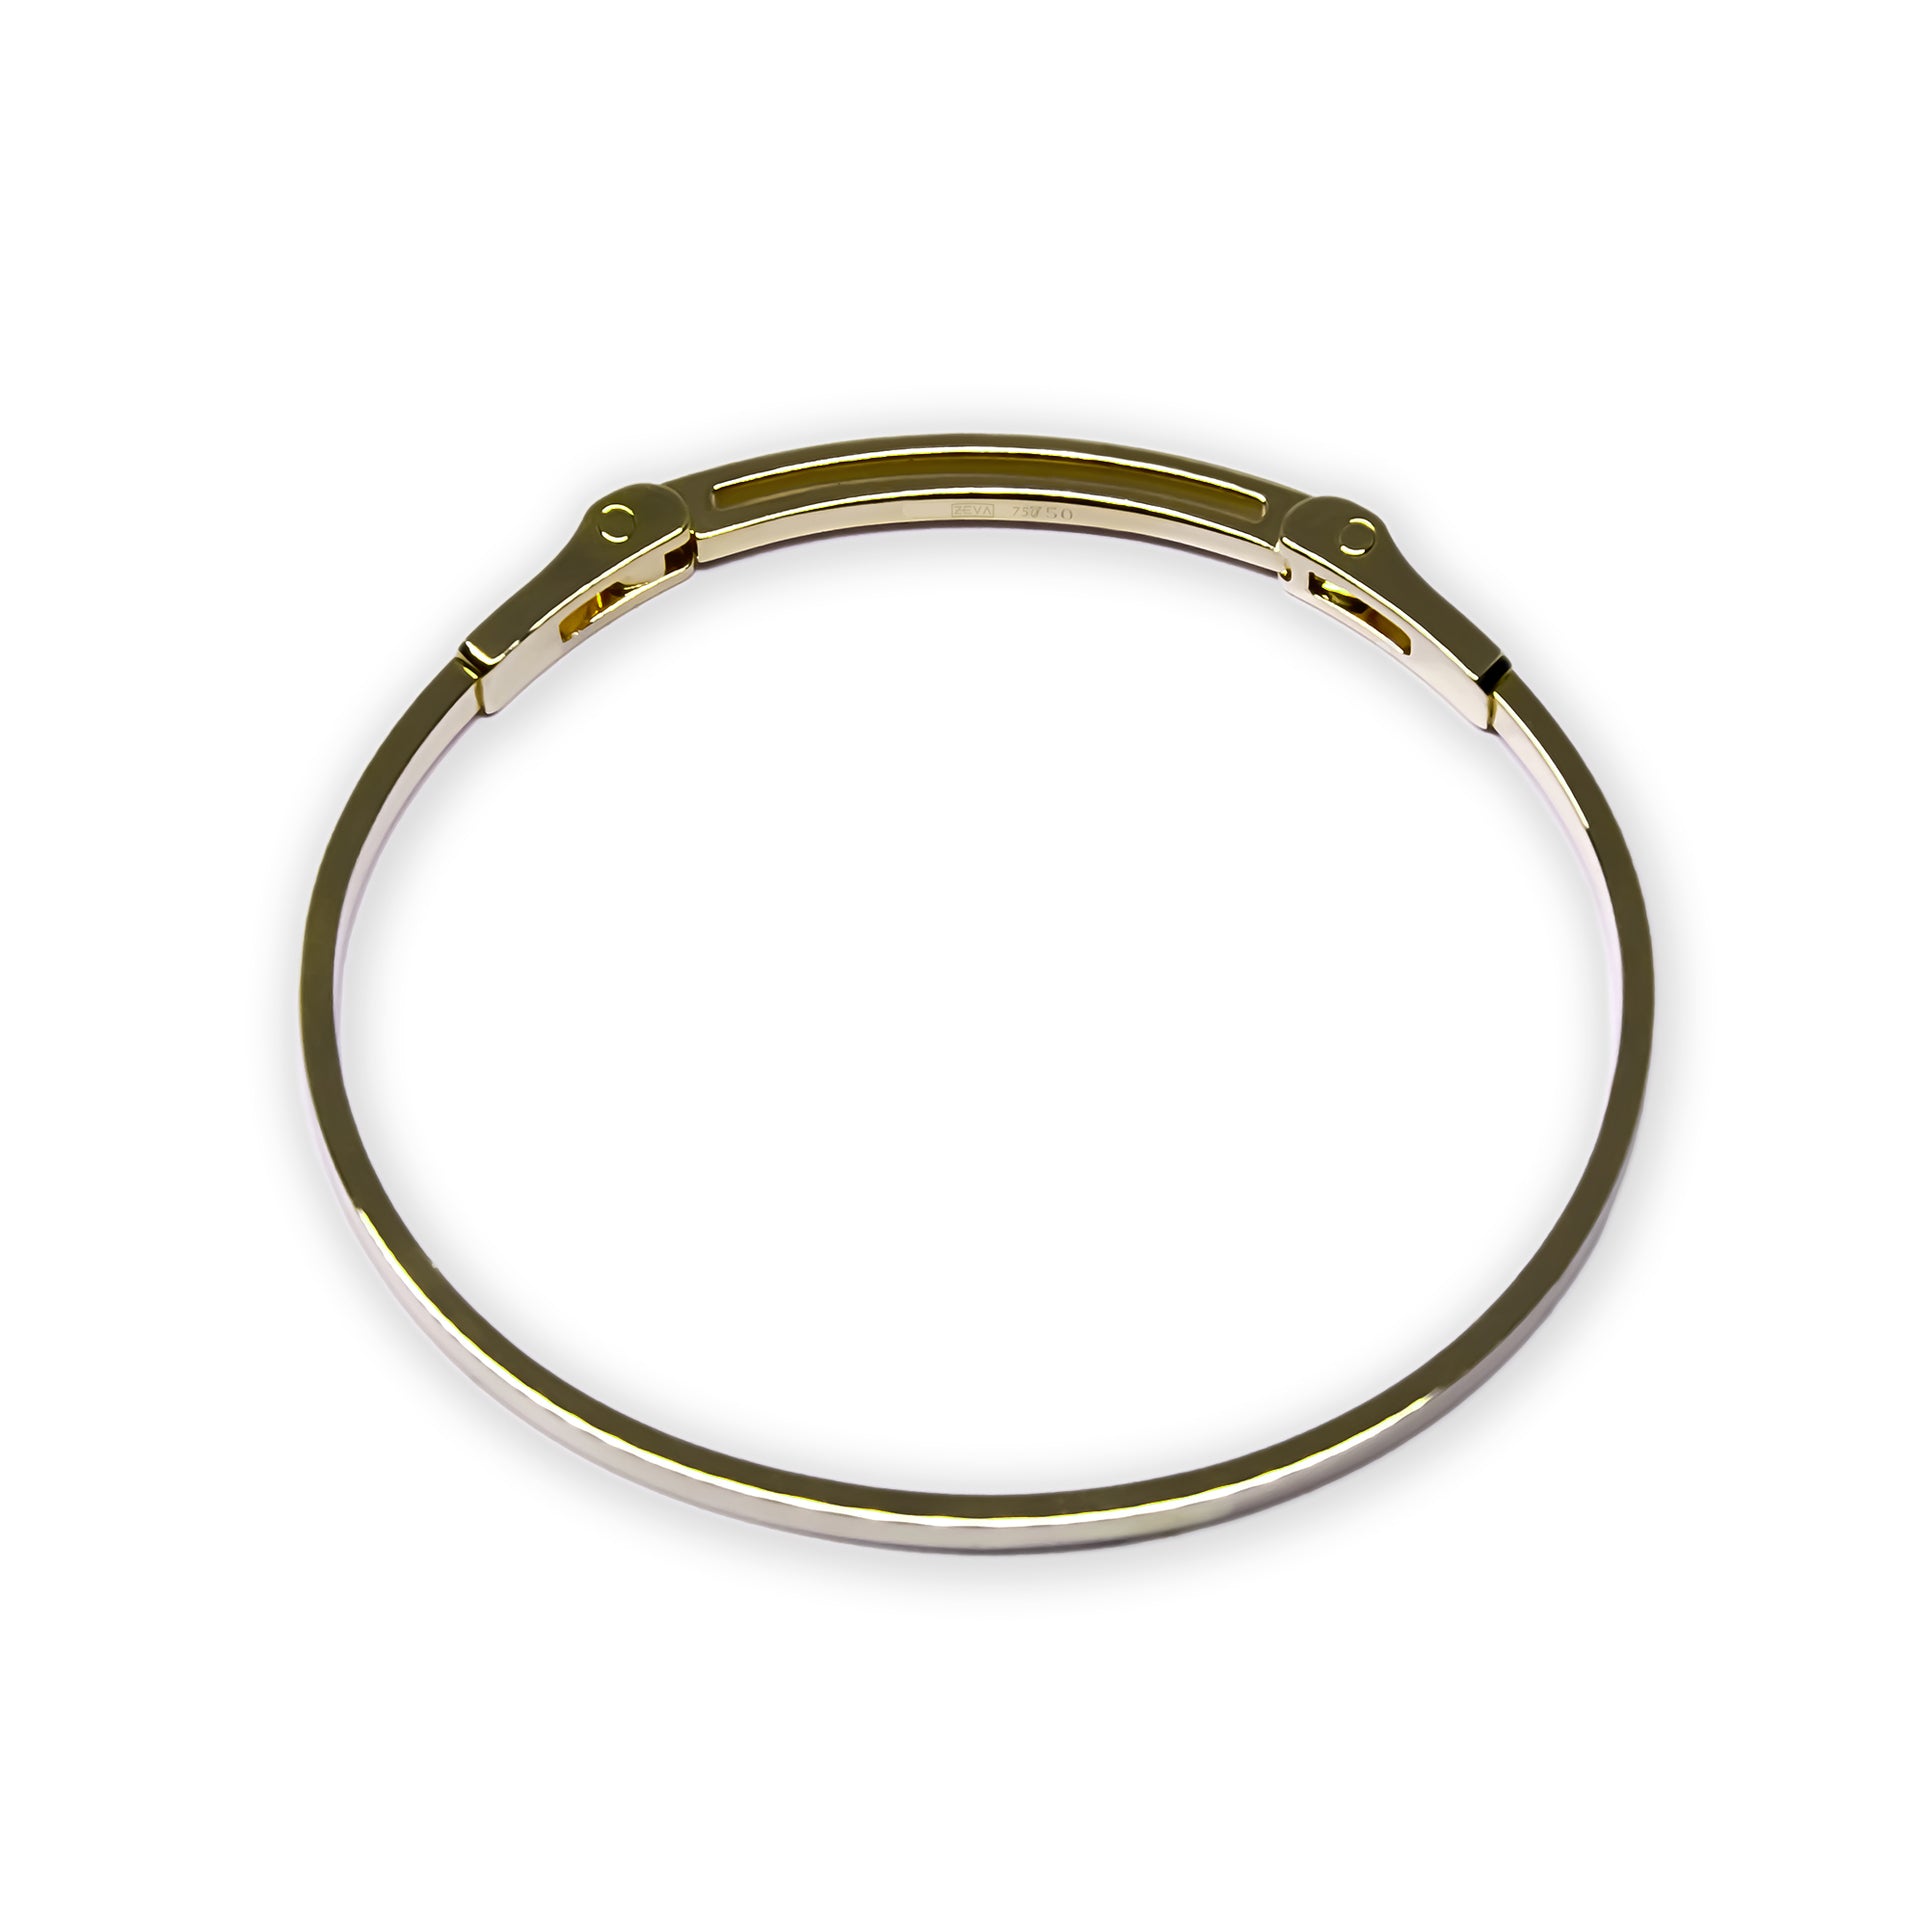 Bracelet EARTH IS ROUND 4mm with hinge yellow gold 18k 750